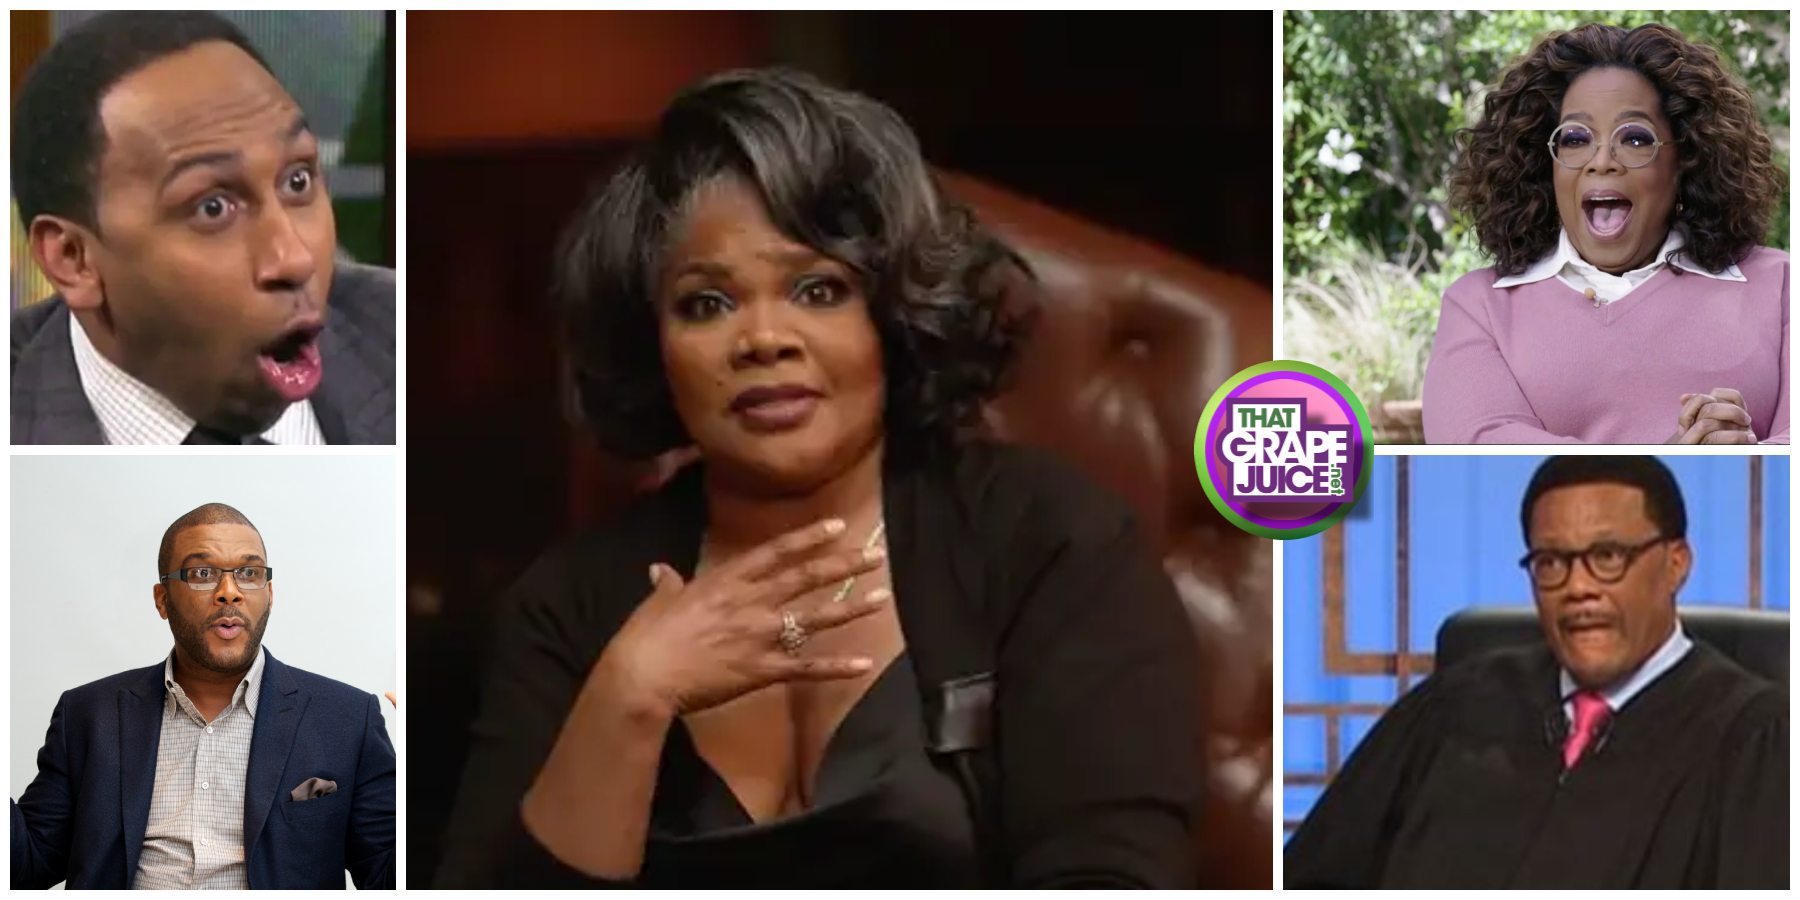 “Suck My D**k”: Mo’Nique Issues NSFW On-Stage “Apology” to Oprah Winfrey, Tyler Perry, Stephen A. Smith, & Greg Mathis [Video]